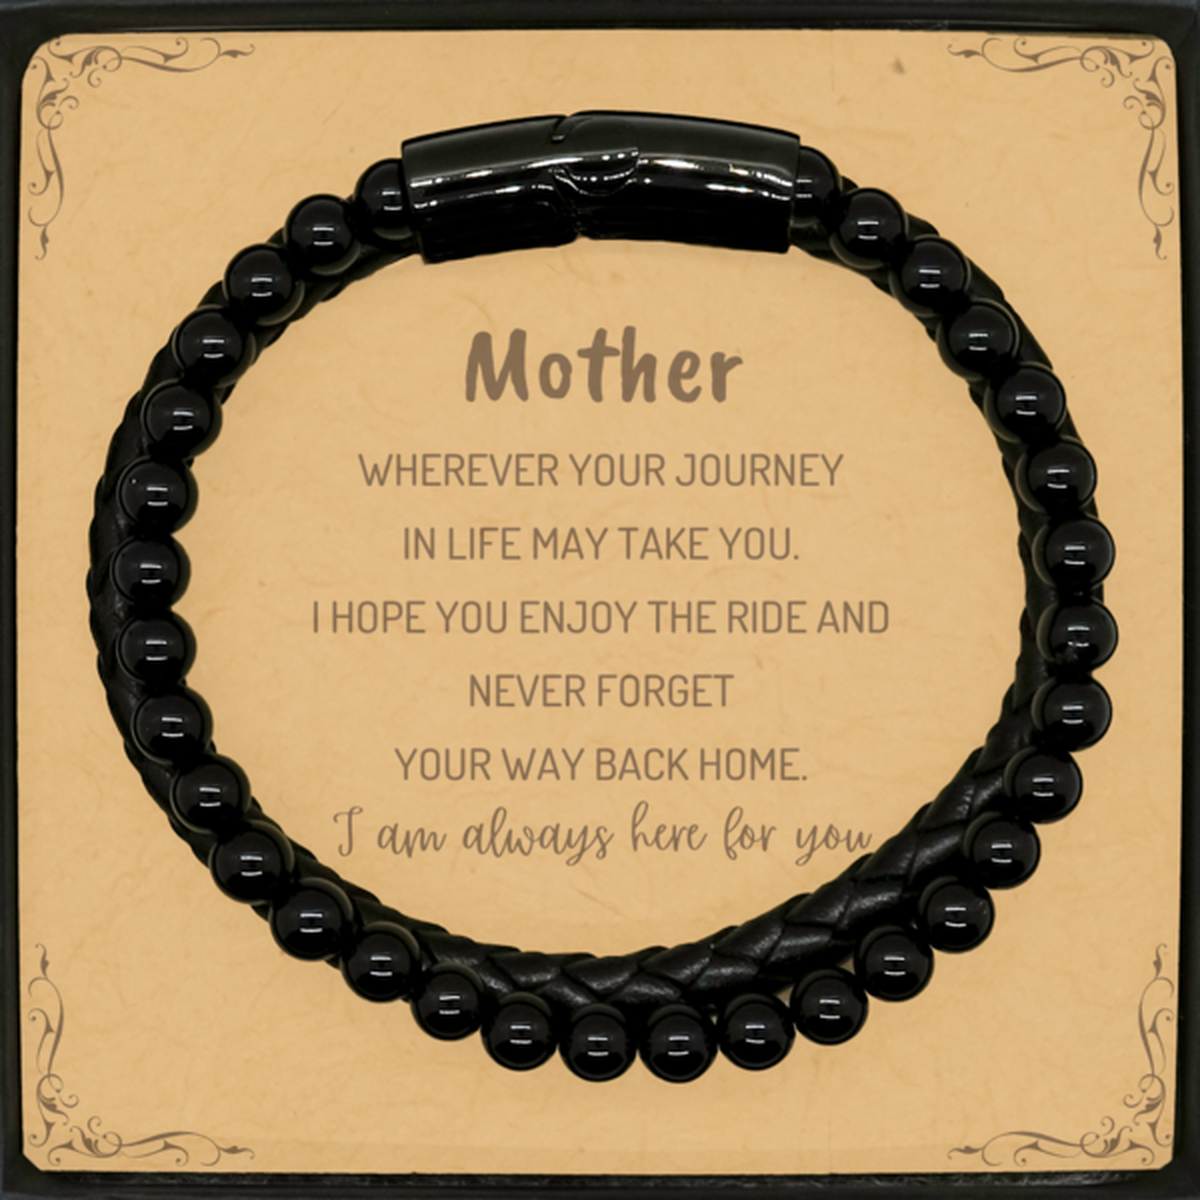 Mother wherever your journey in life may take you, I am always here for you Mother Stone Leather Bracelets, Awesome Christmas Gifts For Mother Message Card, Mother Birthday Gifts for Men Women Family Loved One